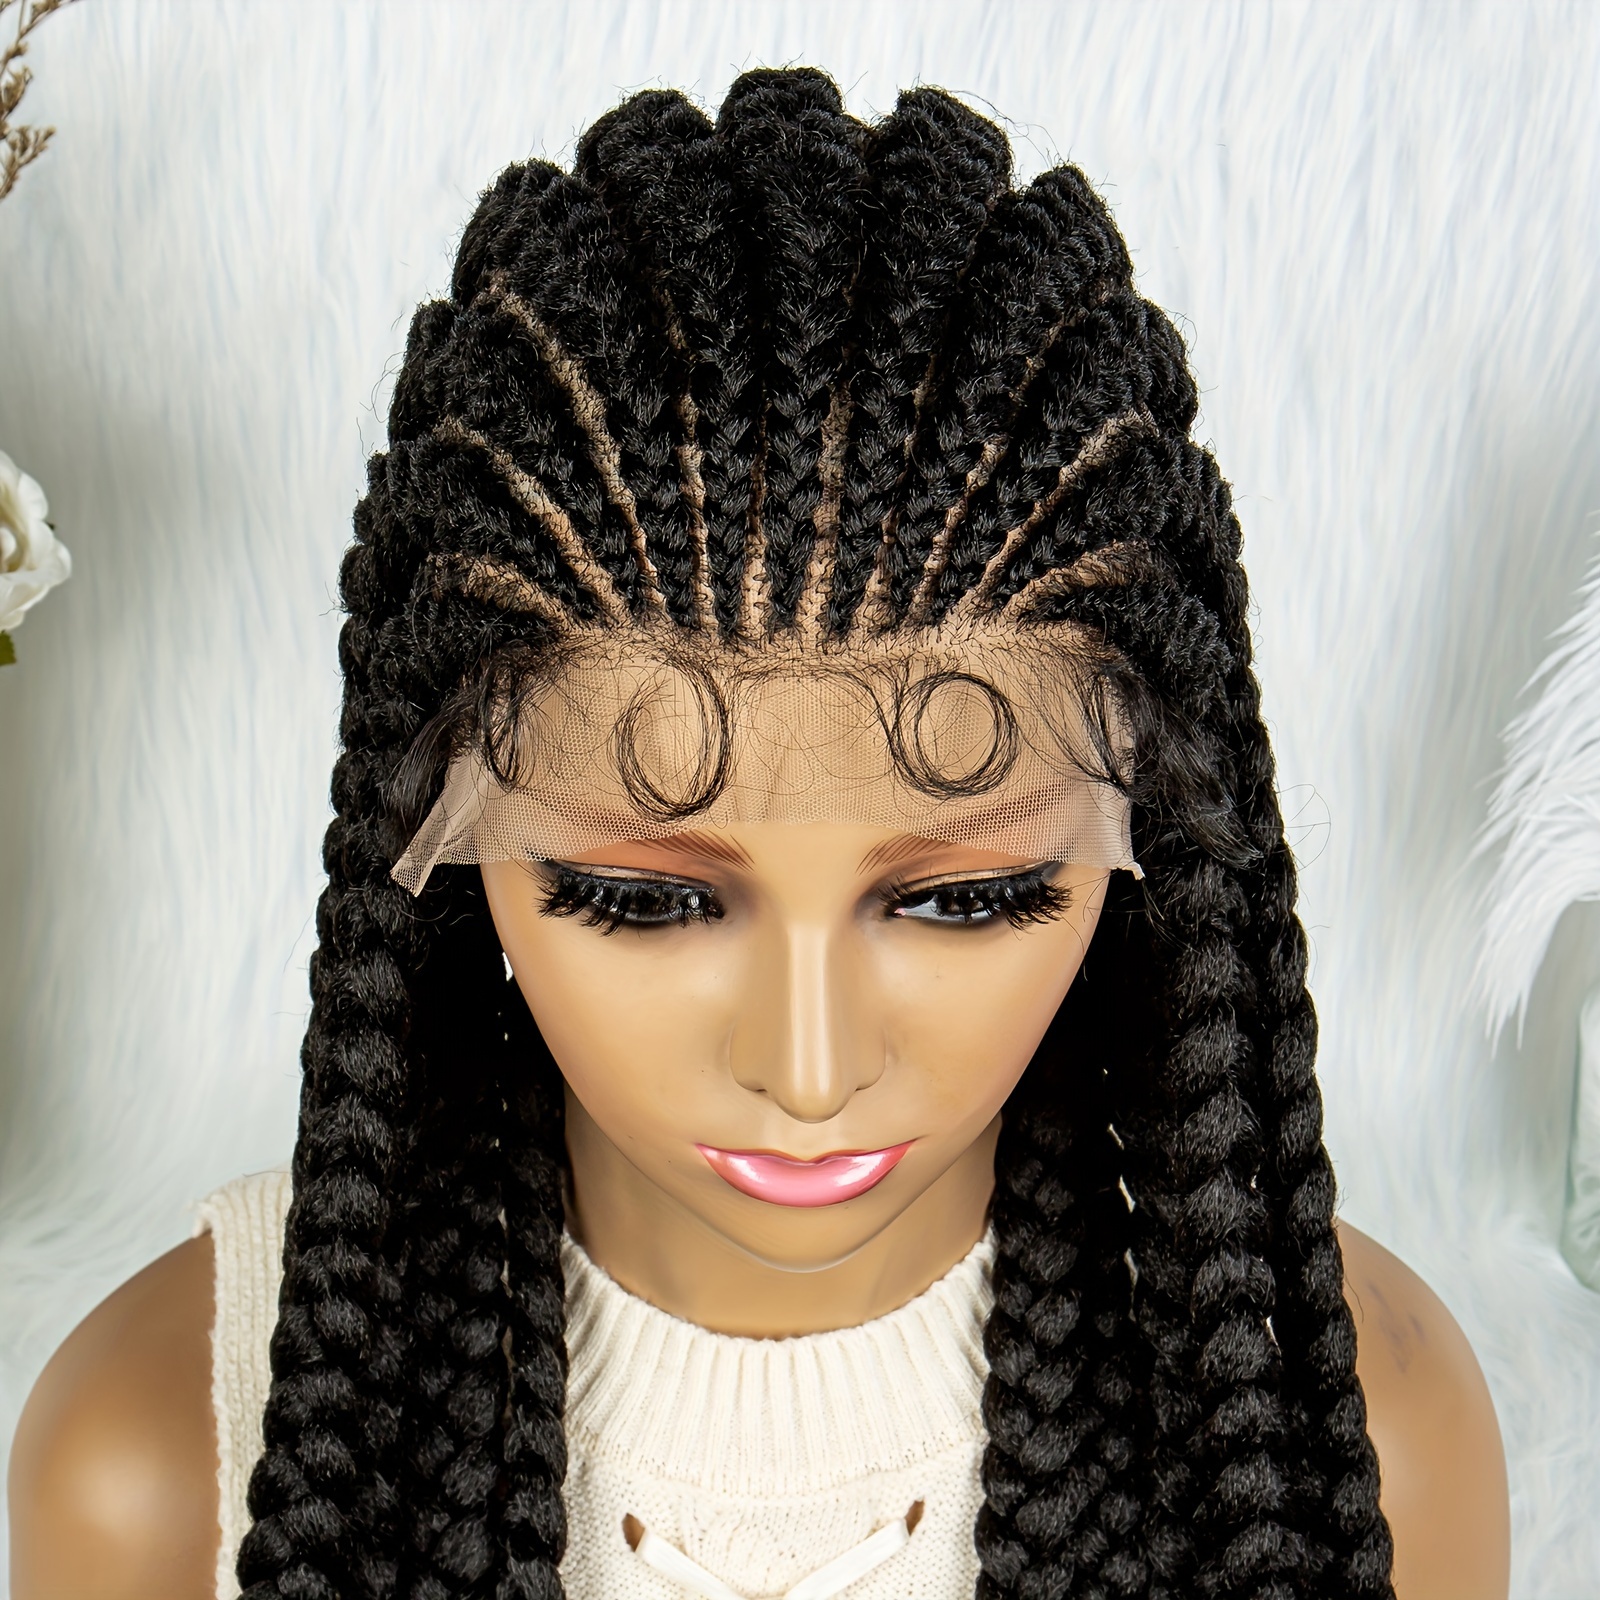 Jumbo Braided Brinbea Braided Wig With Full Lace Front In Black/Brown/Blonde,  Heat Resistant And Free Box Braids For Babies From Bkebeautyhair, $44.01